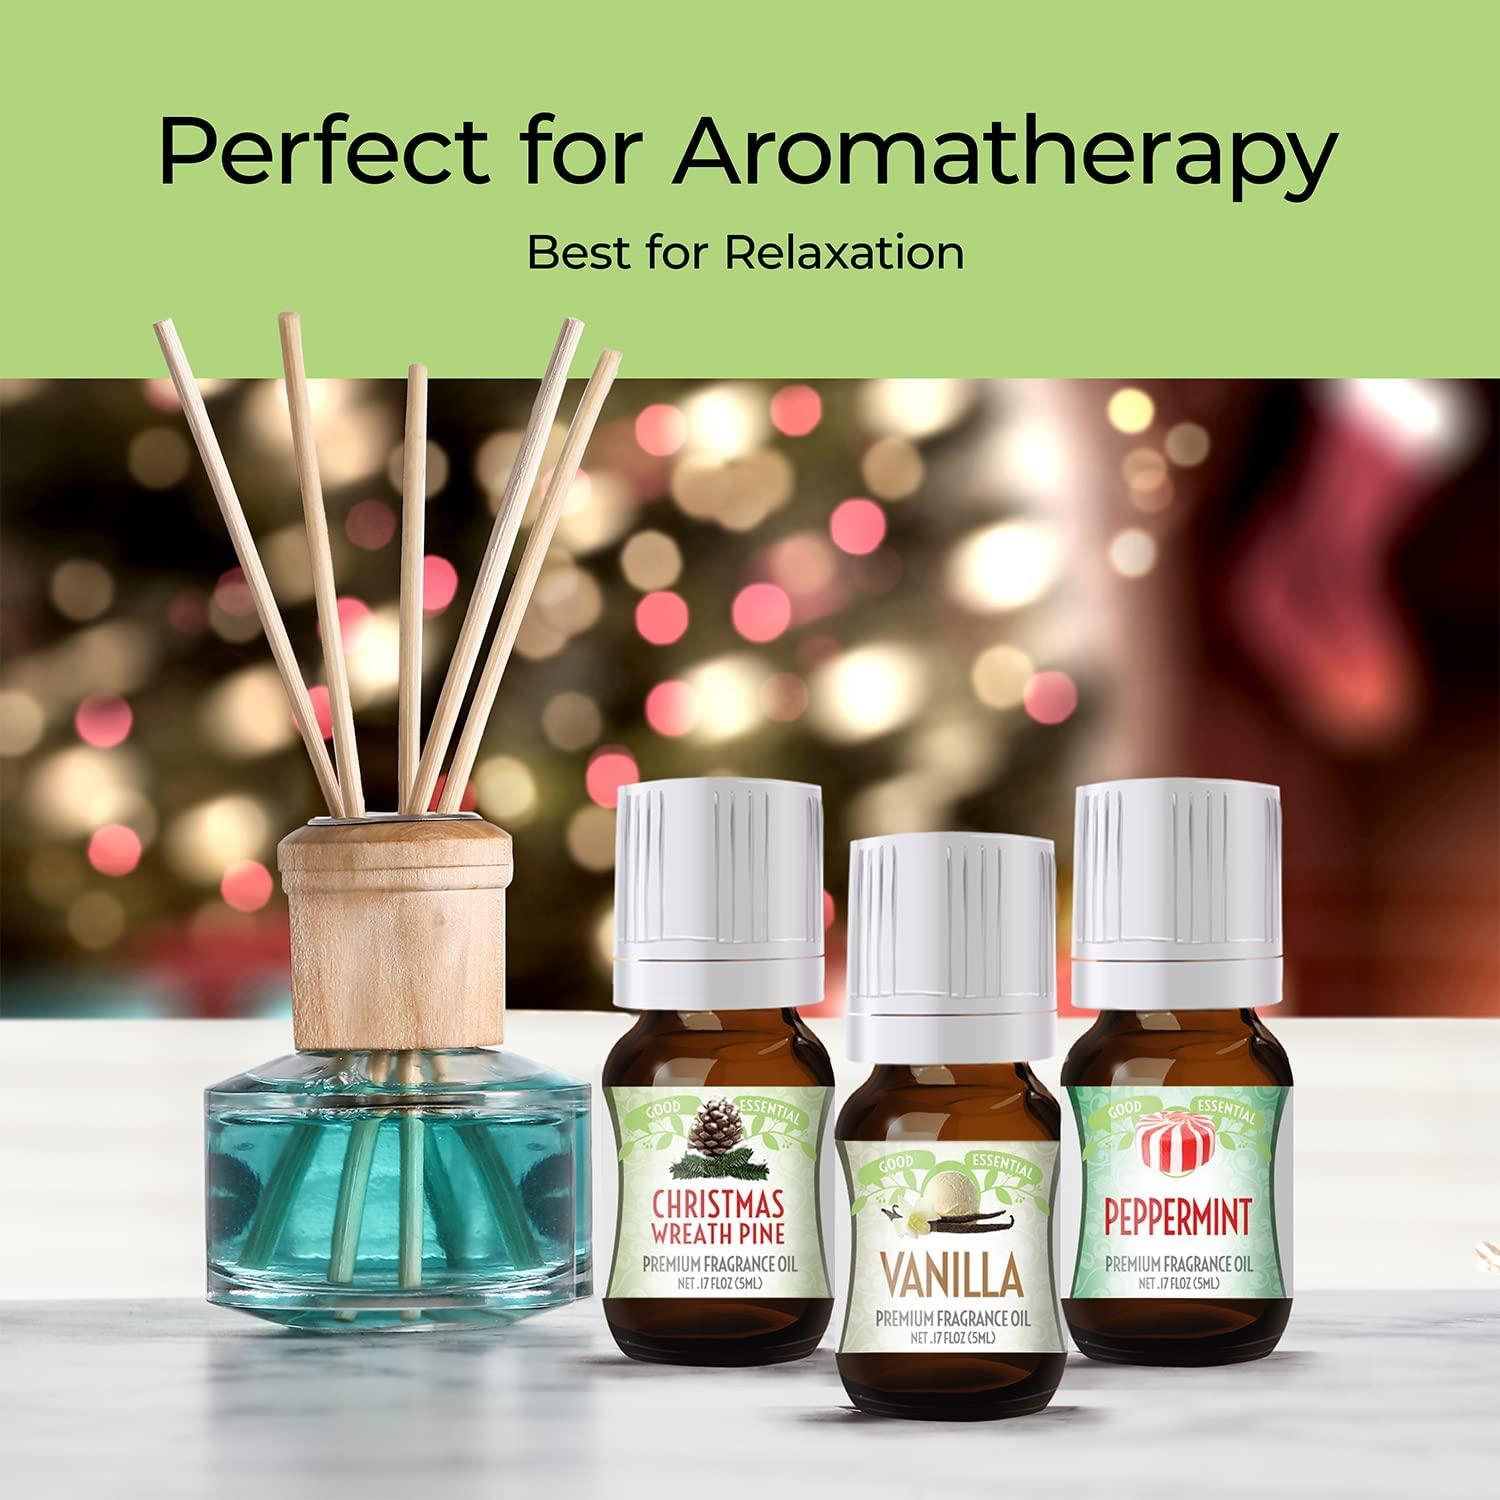 Winter Essential Oil Set of 6 Fragrance Oils - Christmas Wreath Pine  Vanilla Peppermint Cinnamon Sugar Cookie and Gingerbread by Good Essential  Oils